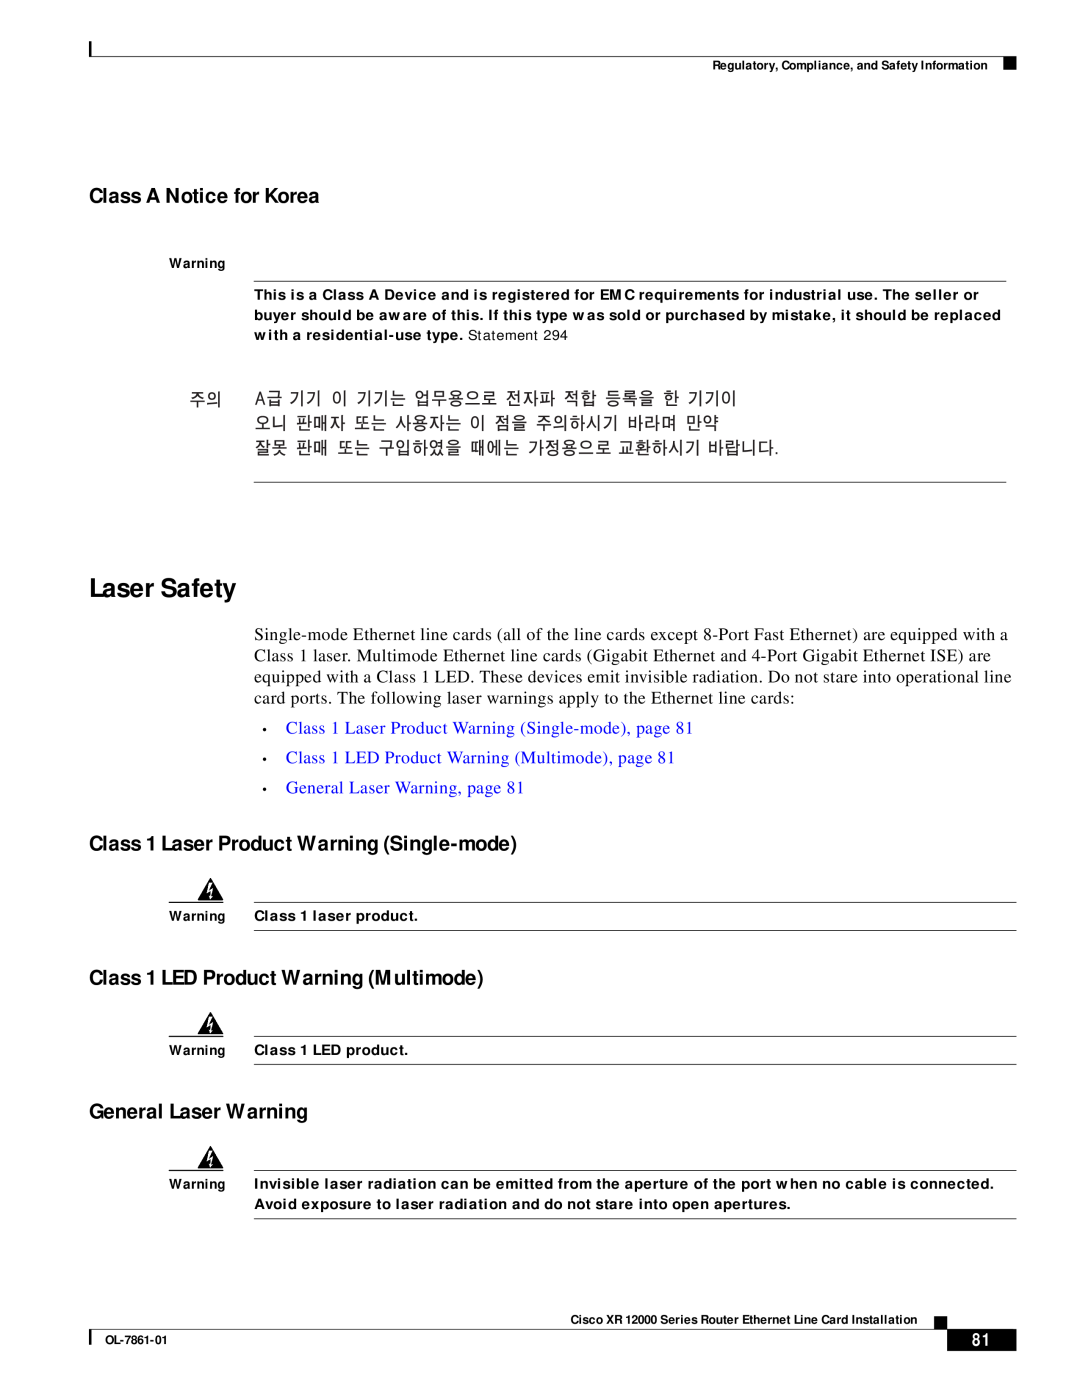 Cisco Systems OL-7861-01 manual Laser Safety, Class A Notice for Korea, Class 1 Laser Product Warning Single-mode 